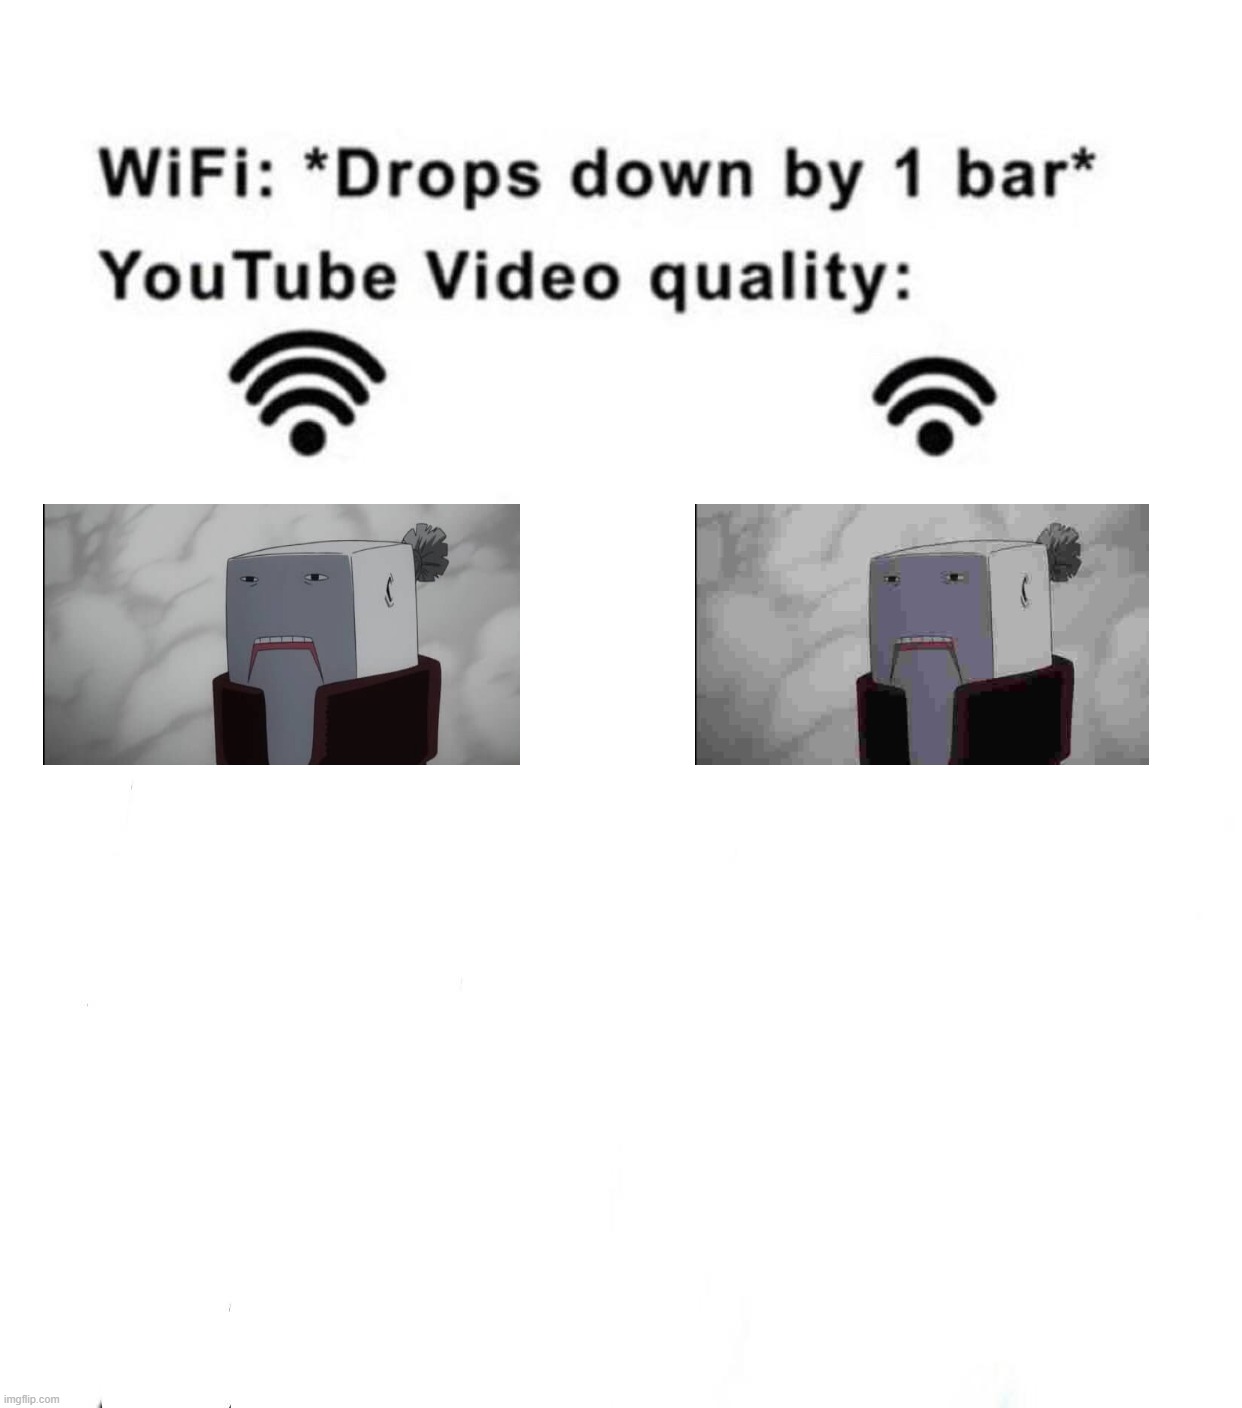 Wifi be like | image tagged in wifi drops by 1 bar,cementoss,what | made w/ Imgflip meme maker